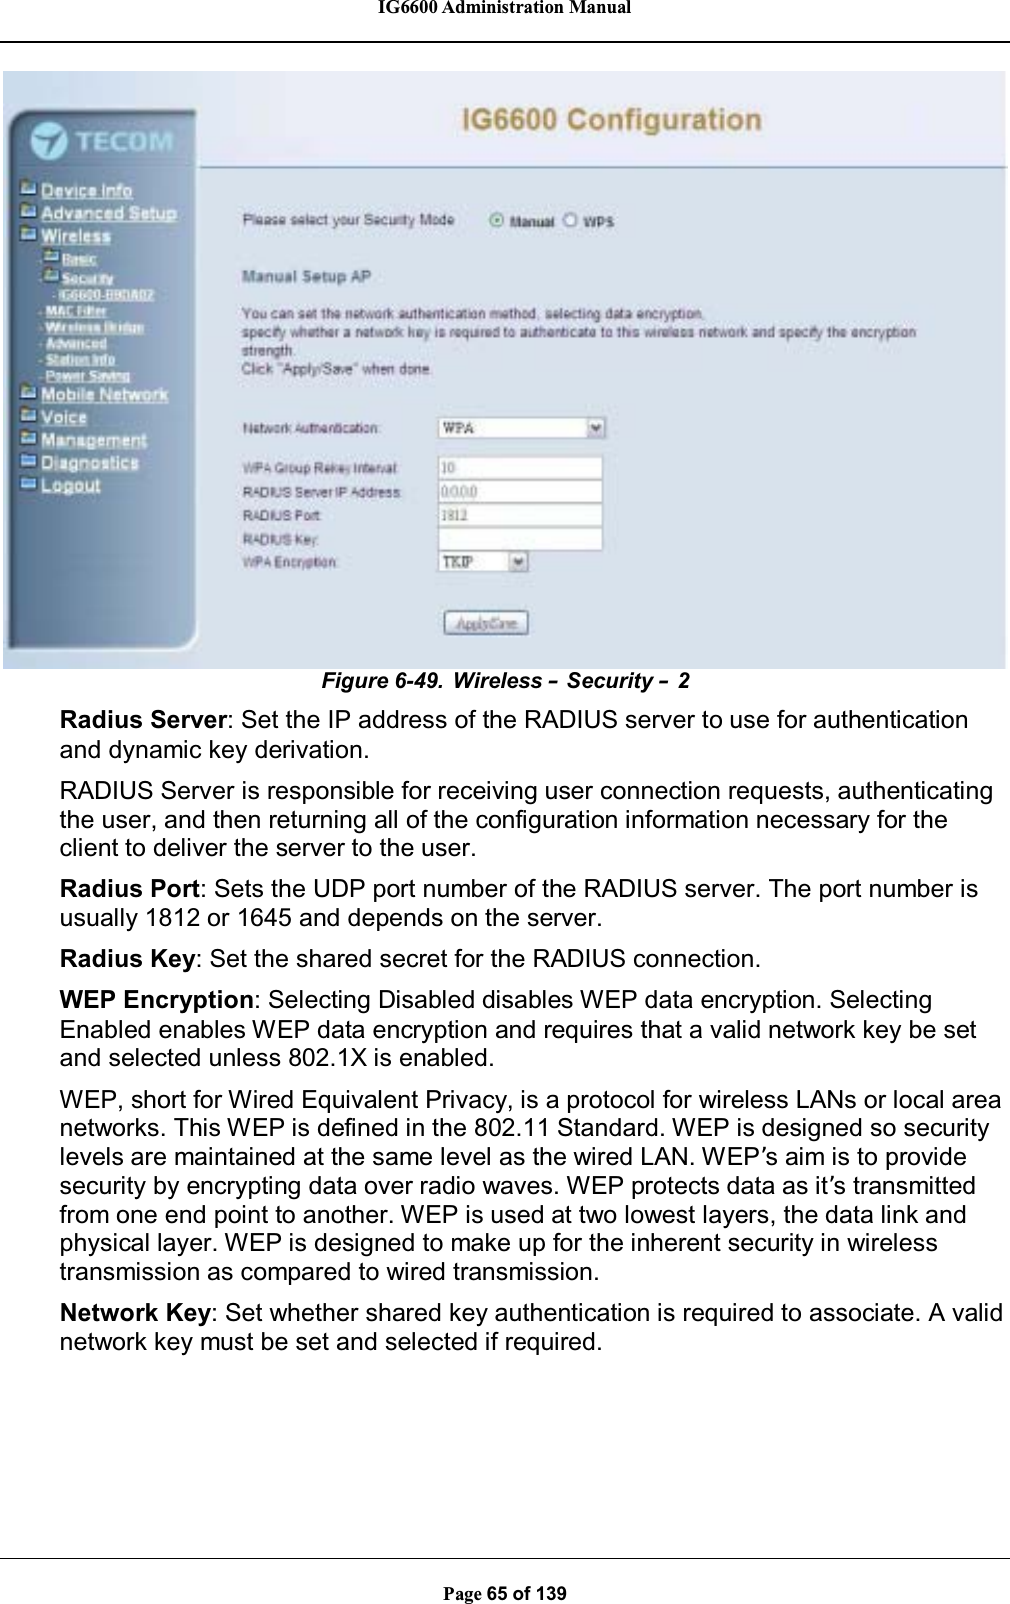 IG6600 Administration ManualPage 65 of 139Figure 6-49. Wireless –Security –2Radius Server: Set the IP address of the RADIUS server to use for authenticationand dynamic key derivation.RADIUS Server is responsible for receiving user connection requests, authenticatingthe user, and then returning all of the configuration information necessary for theclient to deliver the server to the user.Radius Port: Sets the UDP port number of the RADIUS server. The port number isusually 1812 or 1645 and depends on the server.Radius Key: Set the shared secret for the RADIUS connection.WEP Encryption: Selecting Disabled disables WEP data encryption. SelectingEnabled enables WEP data encryption and requires that a valid network key be setand selected unless 802.1X is enabled.WEP, short for Wired Equivalent Privacy, is a protocol for wireless LANs or local areanetworks. This WEP is defined in the 802.11 Standard. WEP is designed so securitylevels are maintained at the same level as the wired LAN. WEP’s aim is to providesecurity by encrypting data over radio waves. WEP protects data as it’s transmittedfrom one end point to another. WEP is used at two lowest layers, the data link andphysical layer. WEP is designed to make up for the inherent security in wirelesstransmission as compared to wired transmission.Network Key: Set whether shared key authentication is required to associate. A validnetwork key must be set and selected if required.